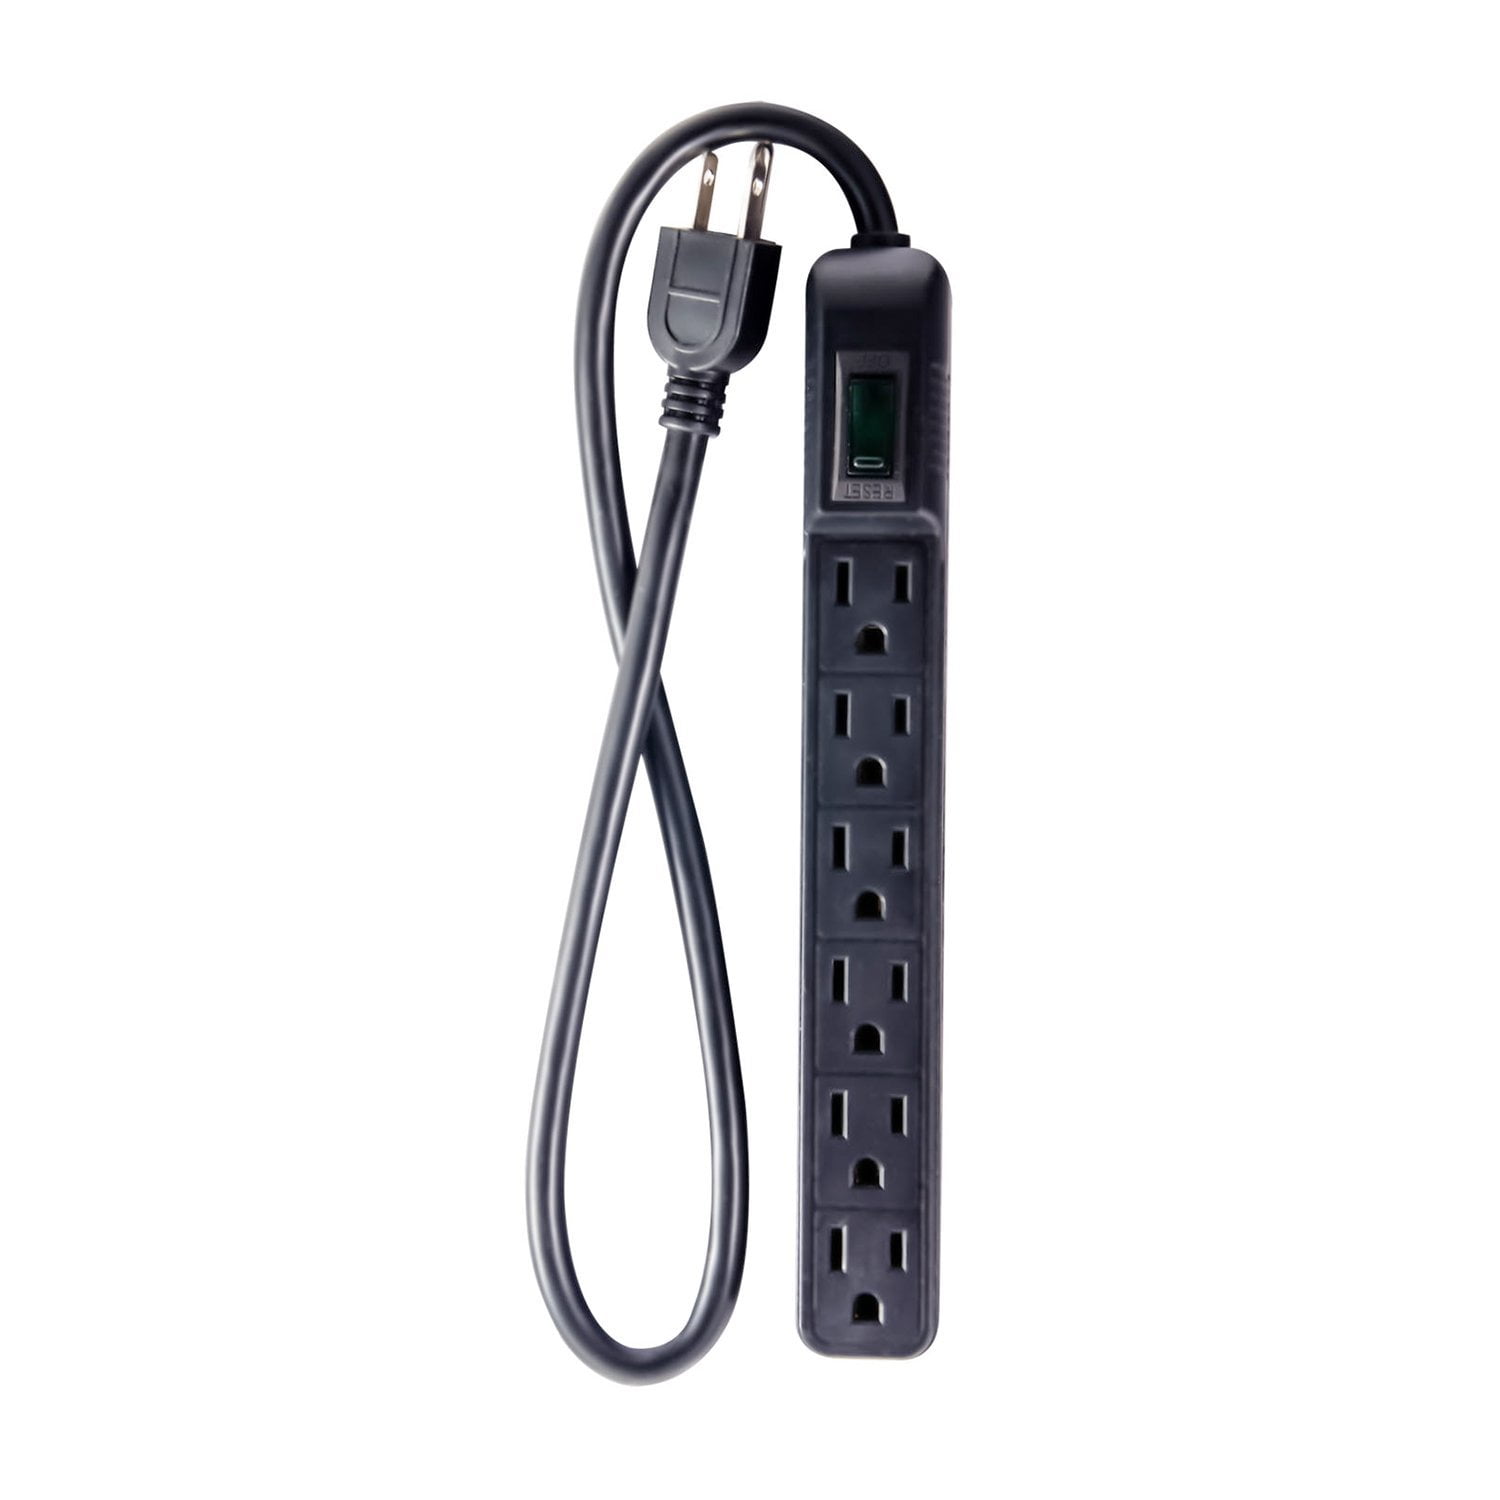 Gogreen Power Gg-16103Ms 6 Outlet Surge Protector W/ 2.5' Cord 